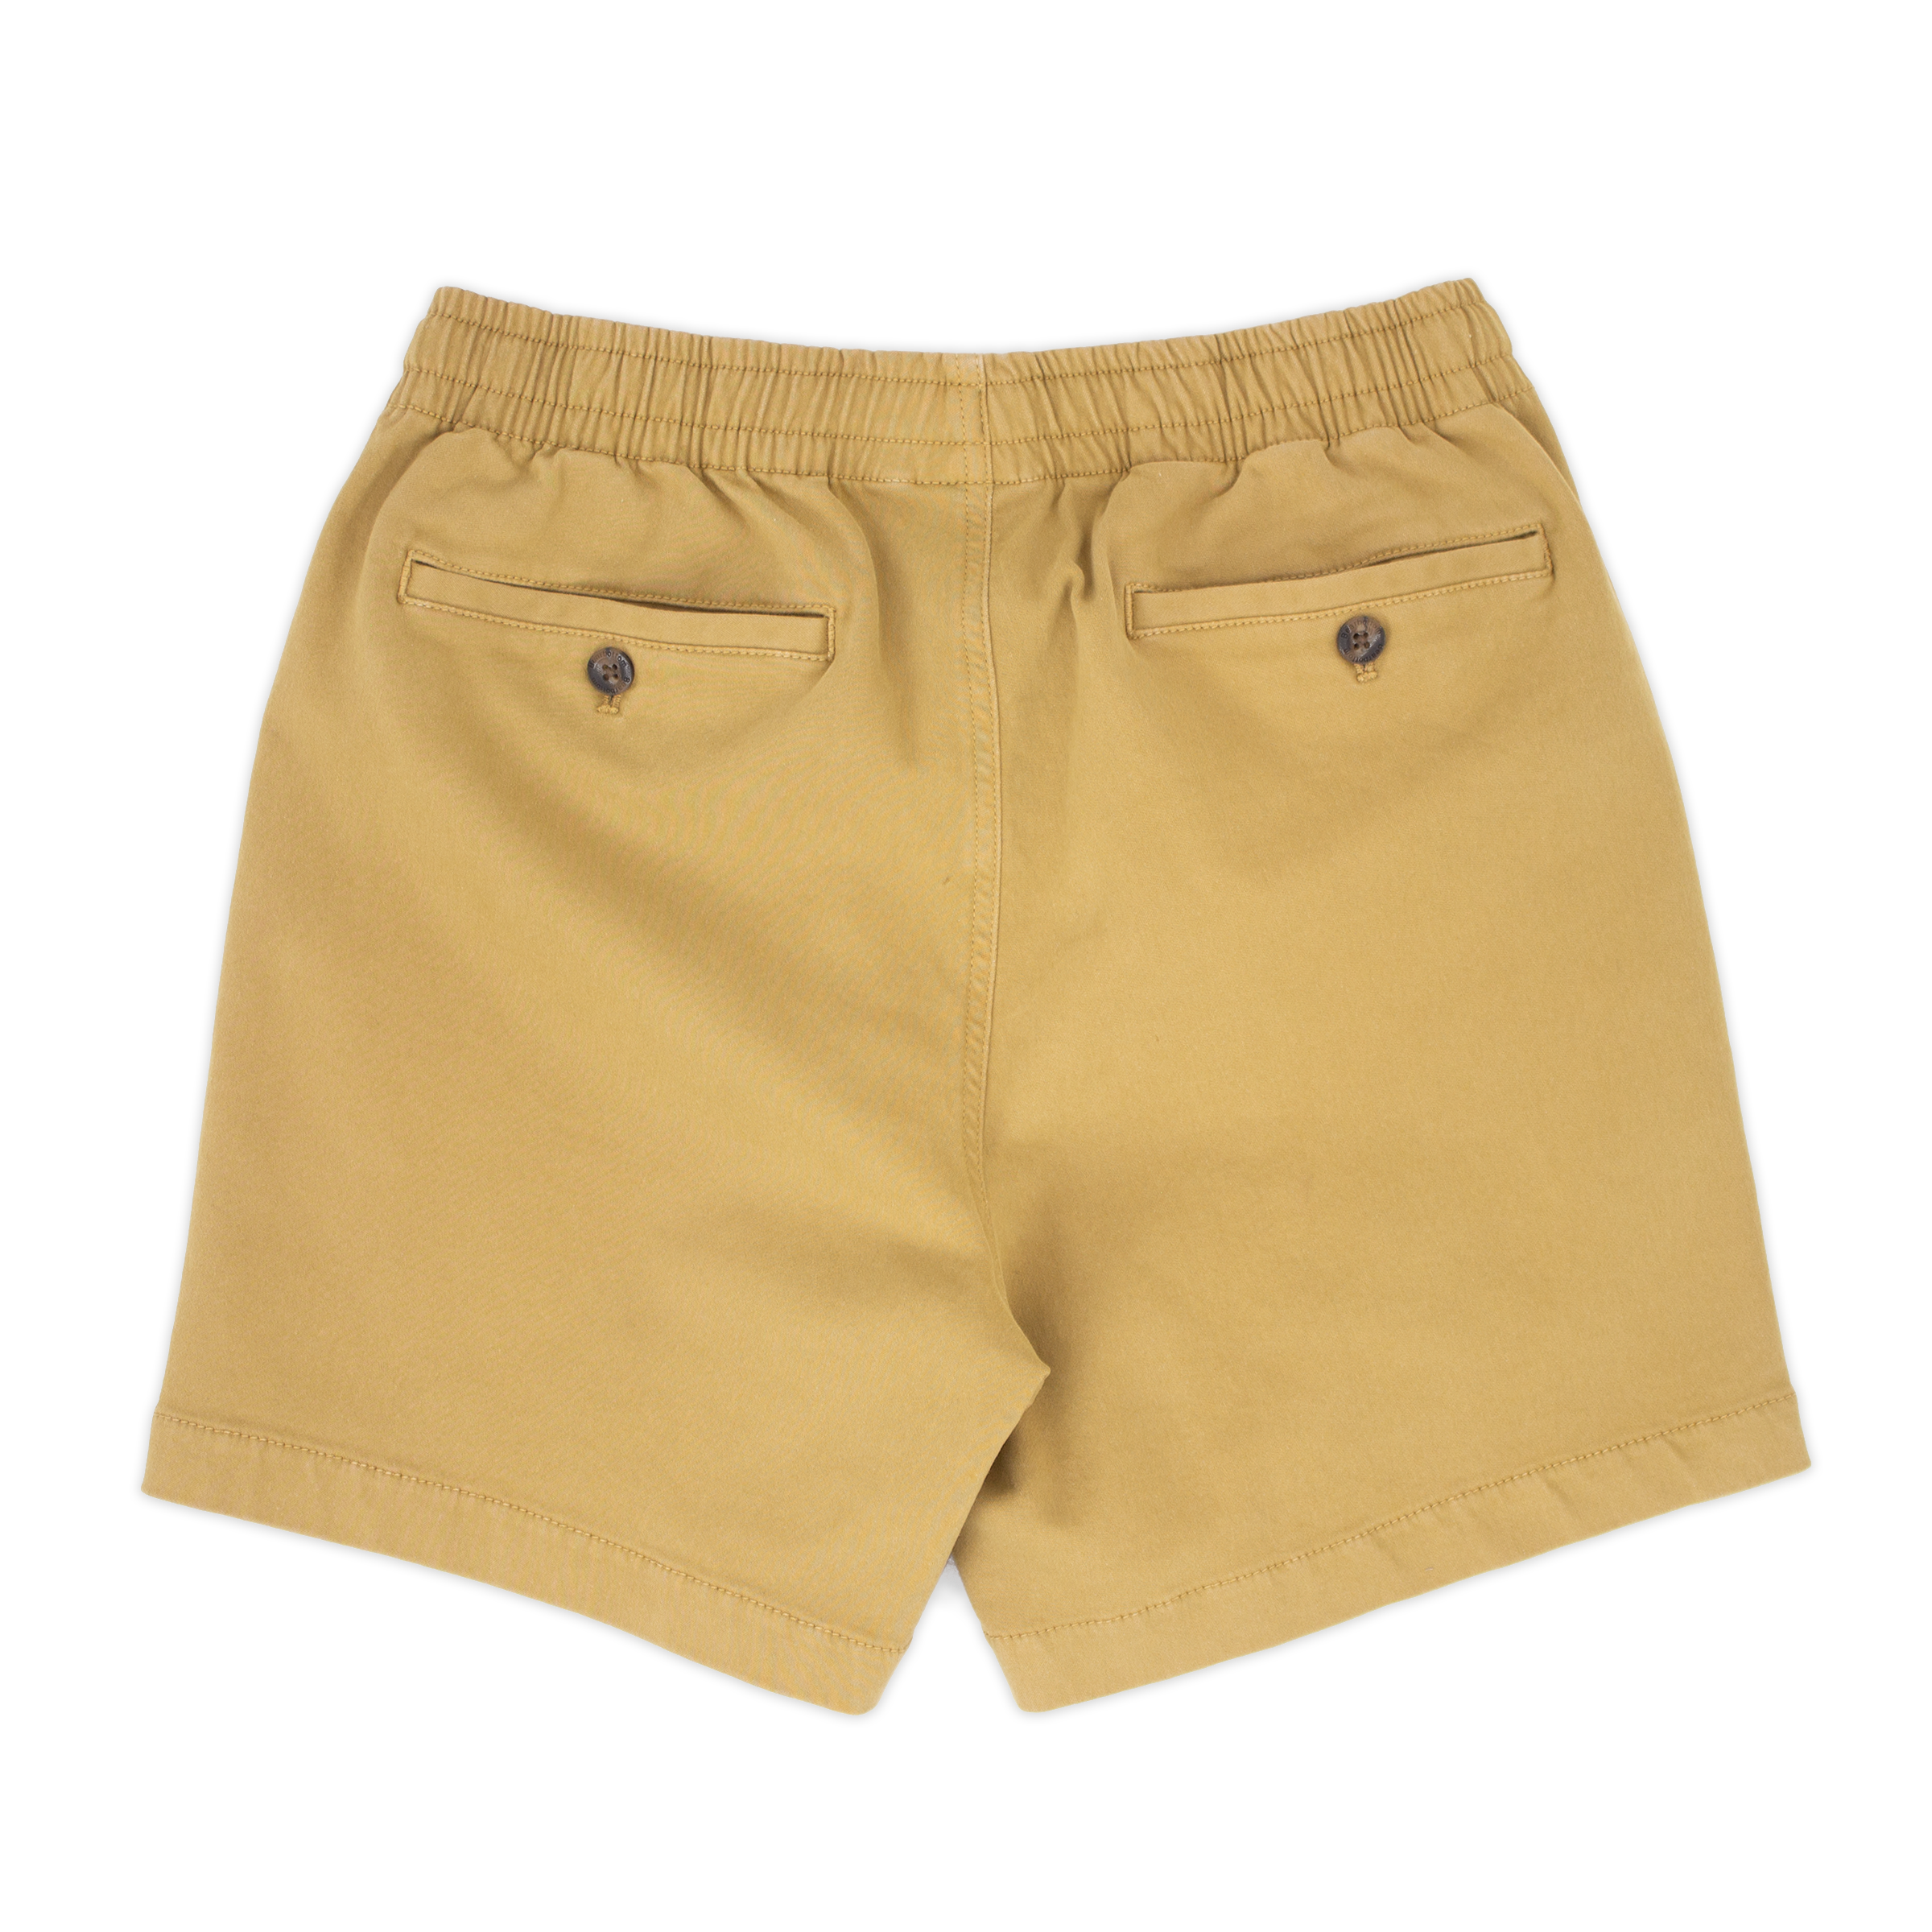 Alto Short 5.5" inseam in Khaki back with elastic waistband and two welt pocket with horn buttons 